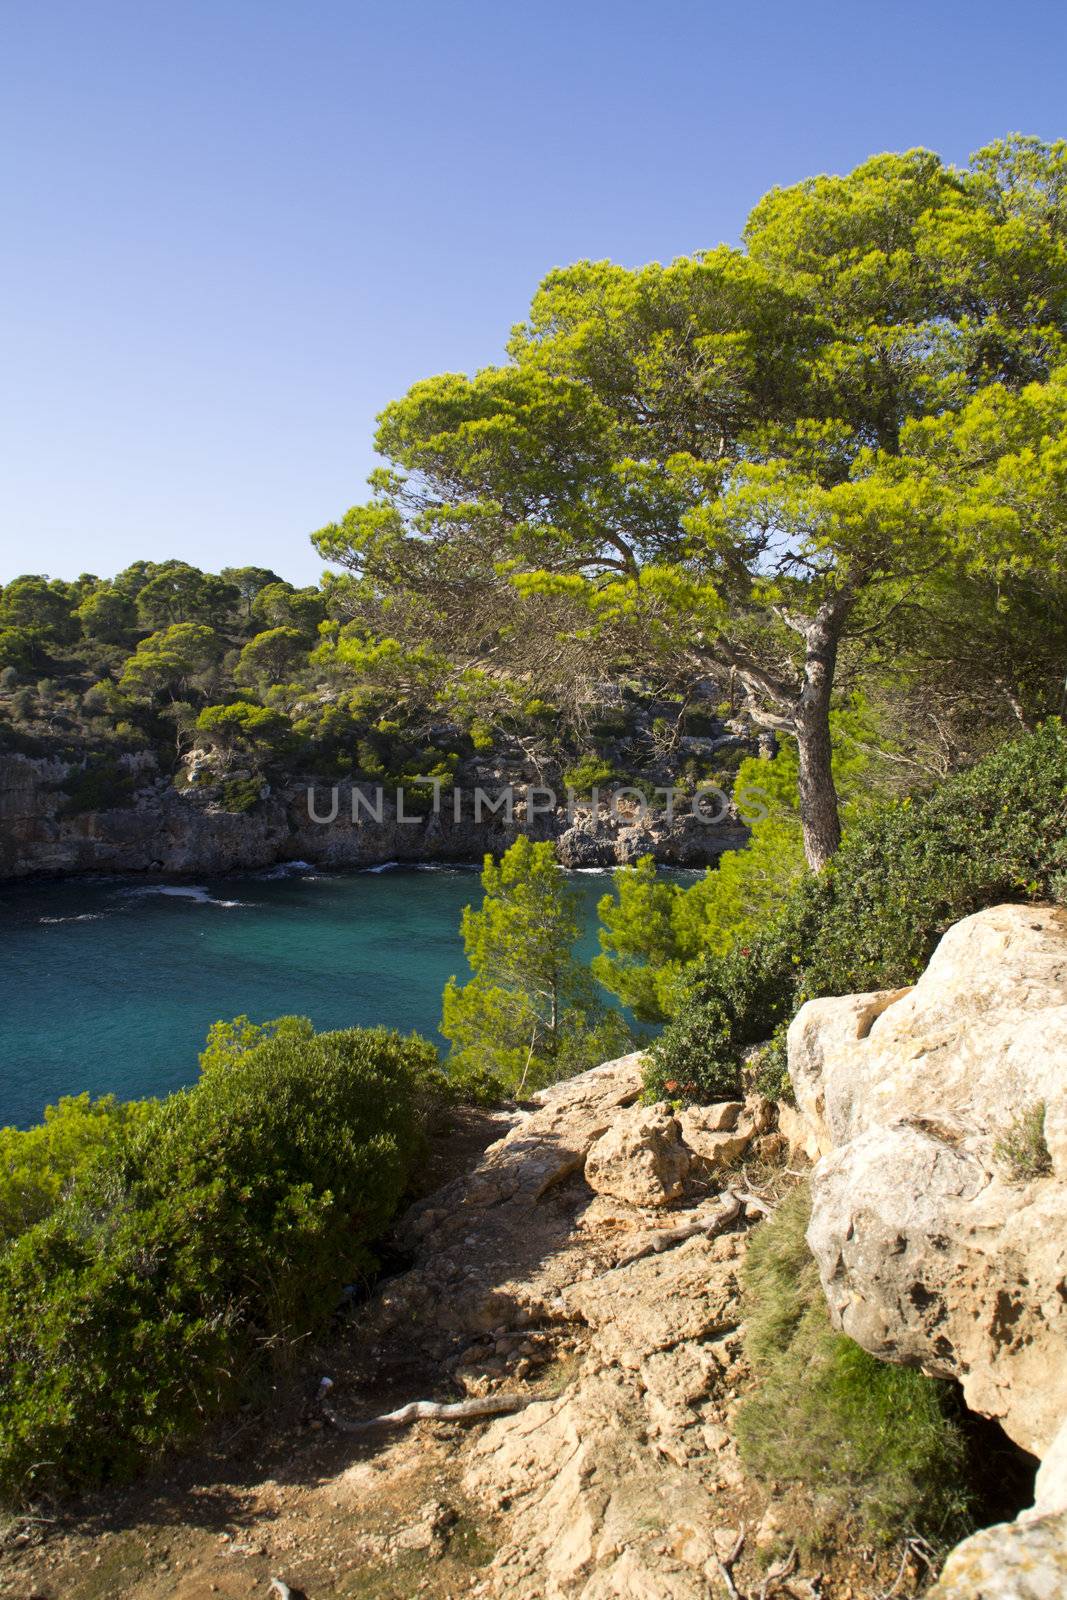 View in Cala pi Mallorca by ladyminnie